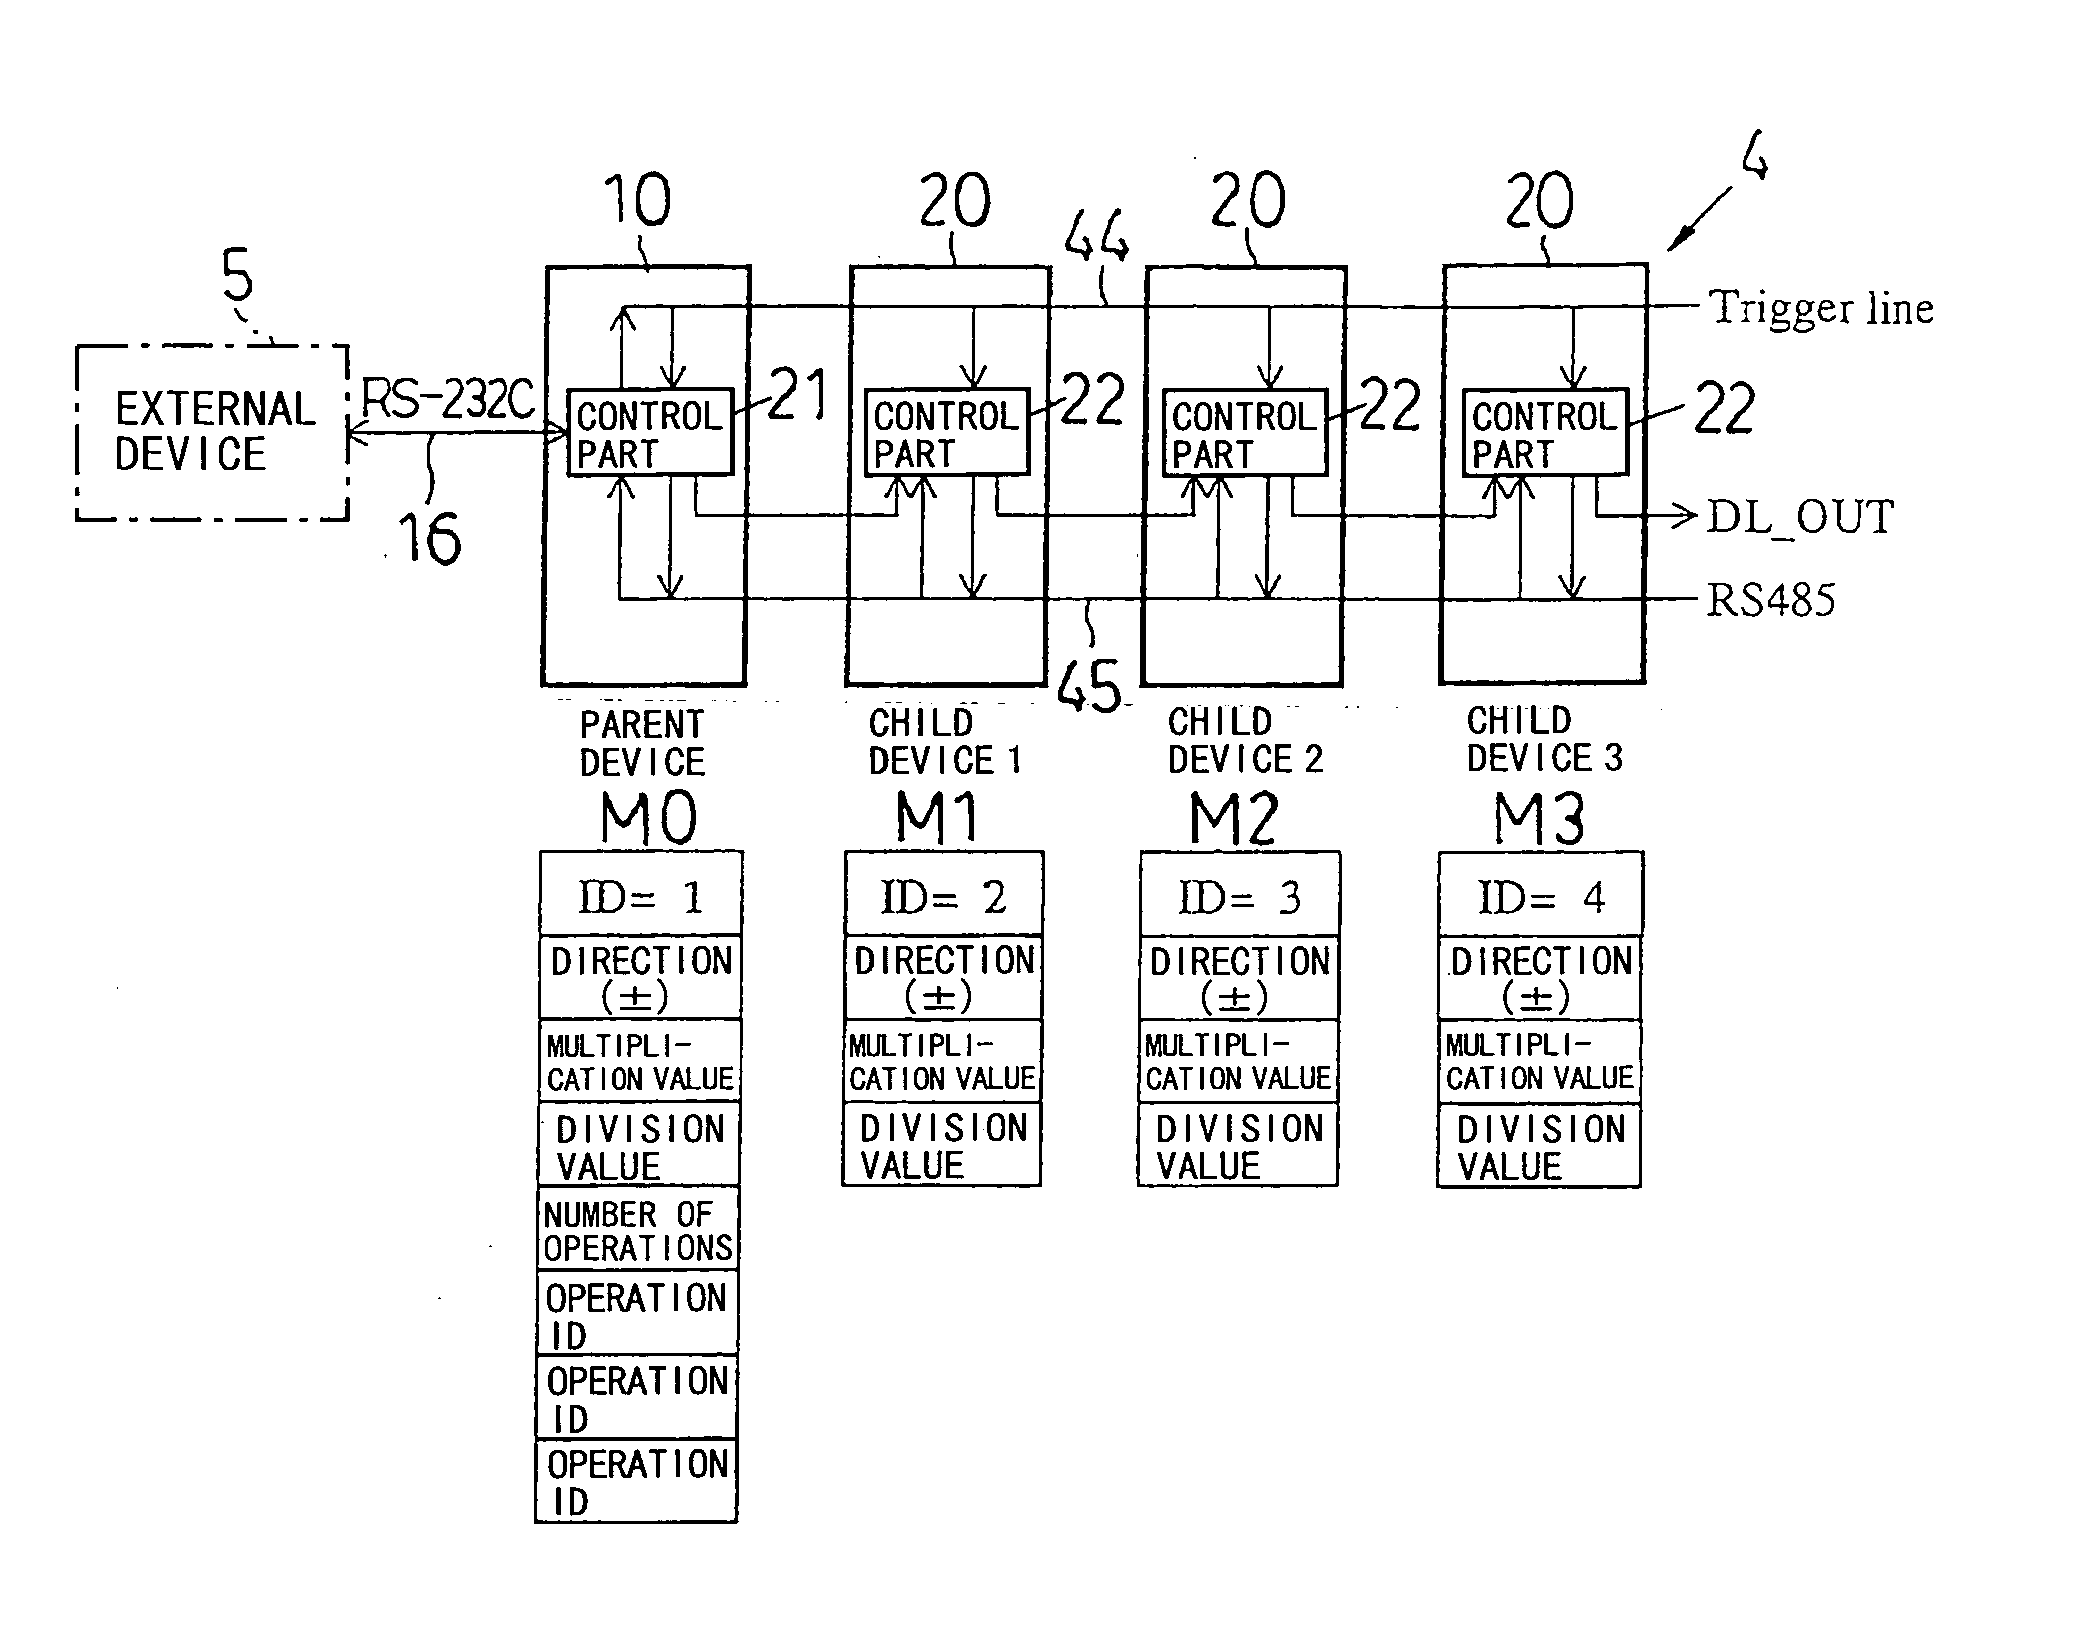 Measurement electronic device system